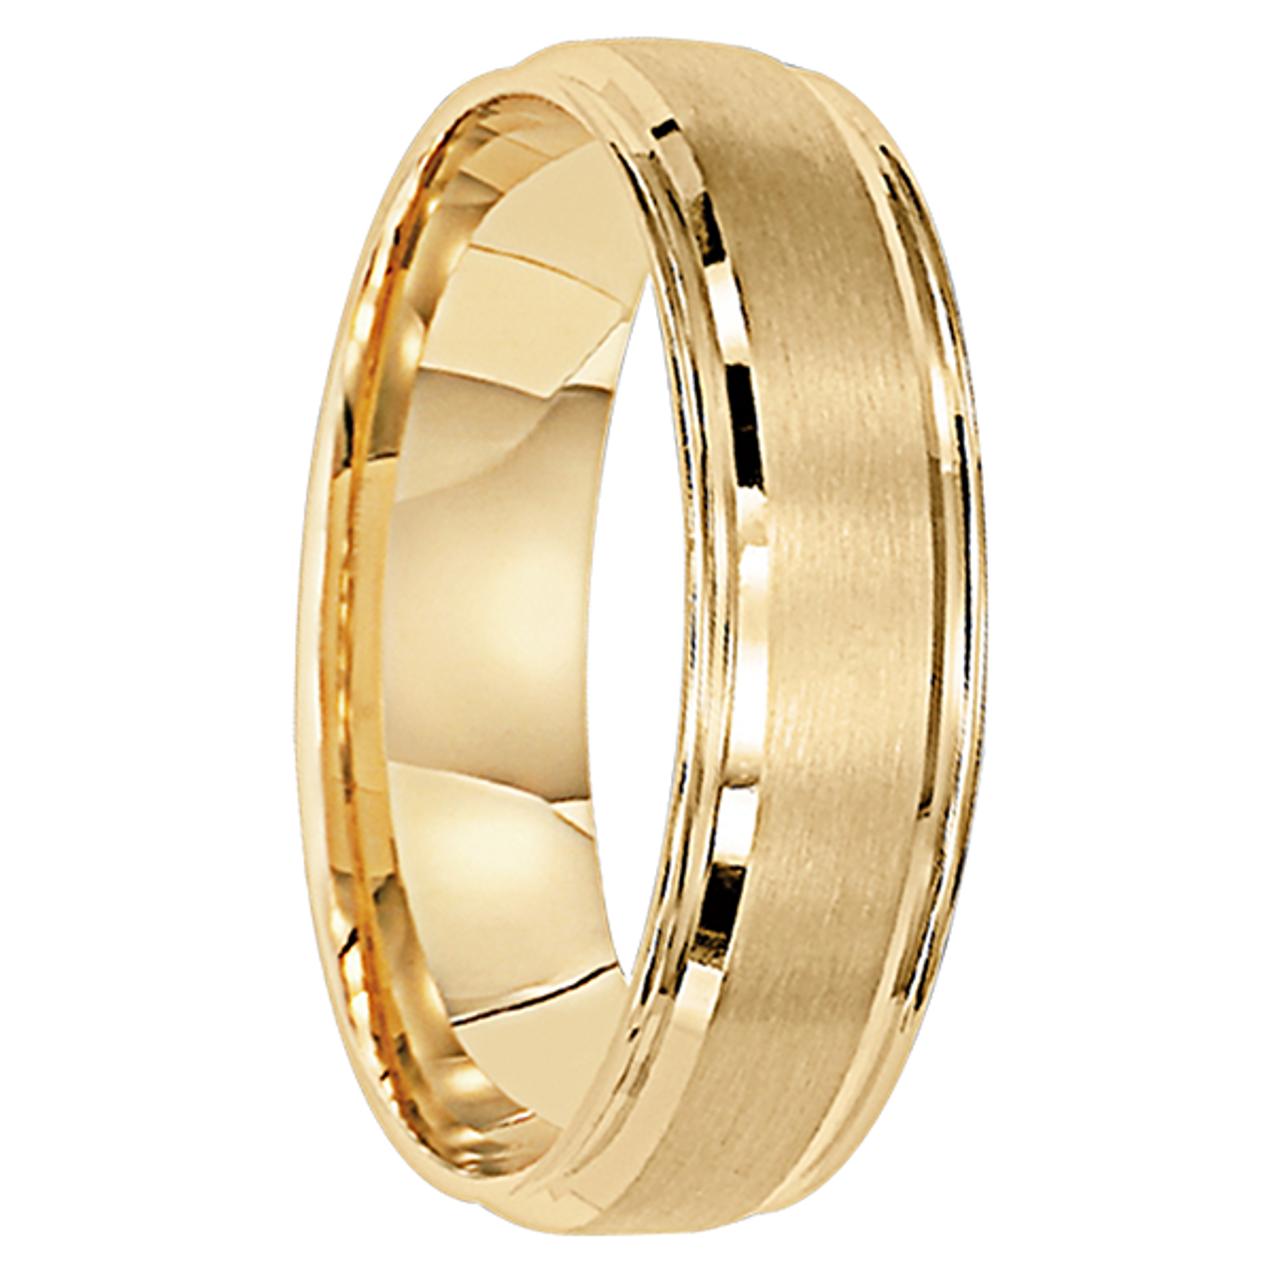 Gold6 Mm 14kt. Gold Handcrafted In U.S. Luxembourg 14  56296.1583273869 ?c=2?imbypass=on